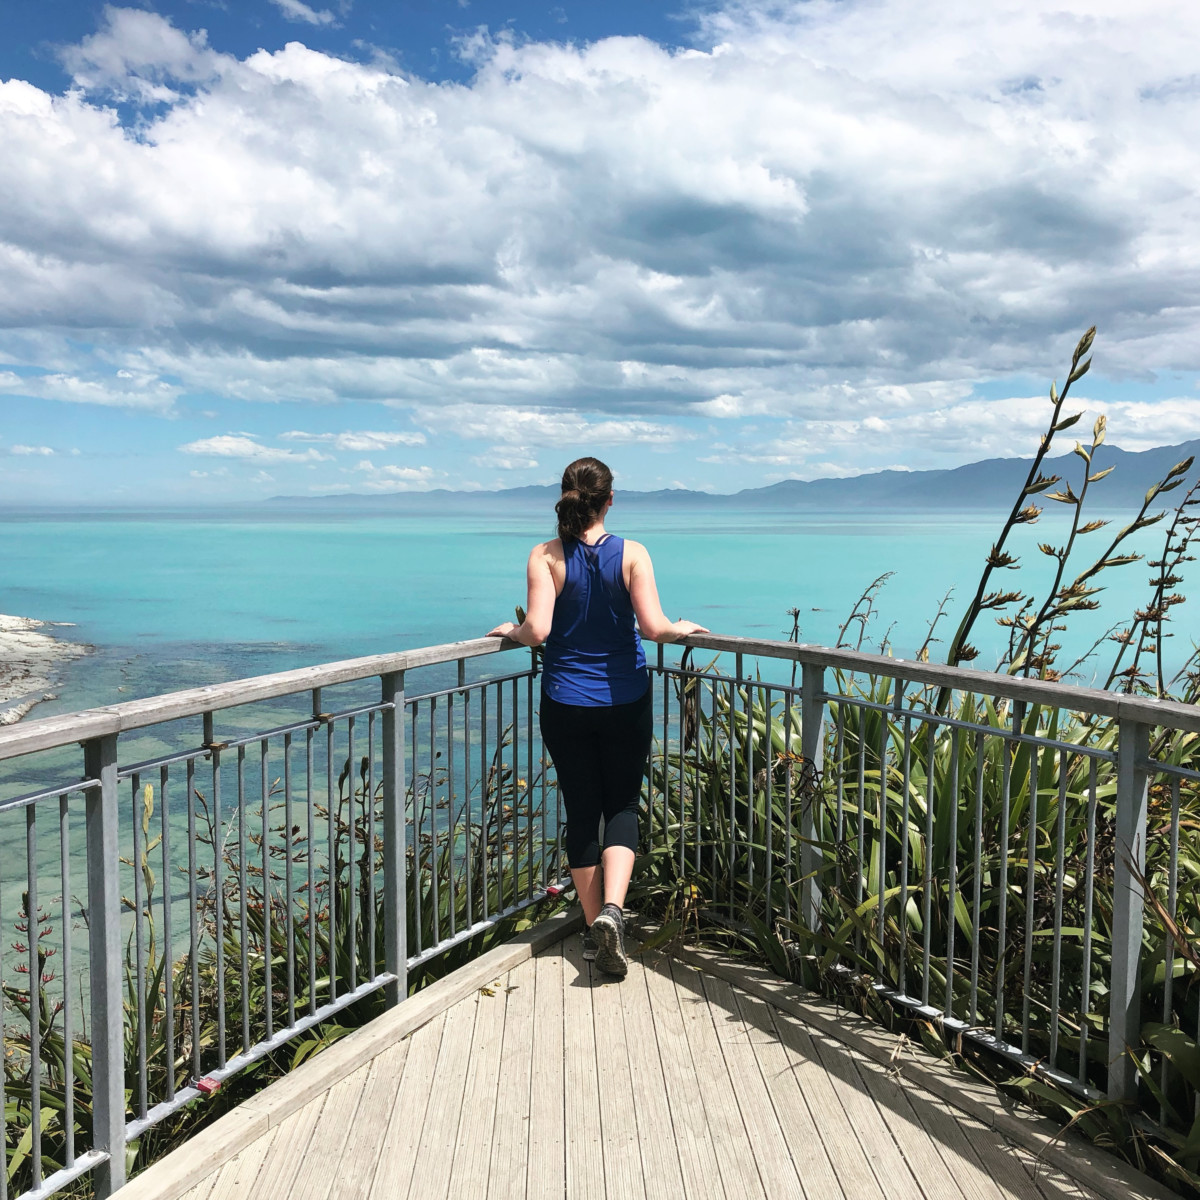 Nina Clapperton stands at the corner of a chest-high fence overlooking a turquoise ocean with a slightly cloudy but blue sky above